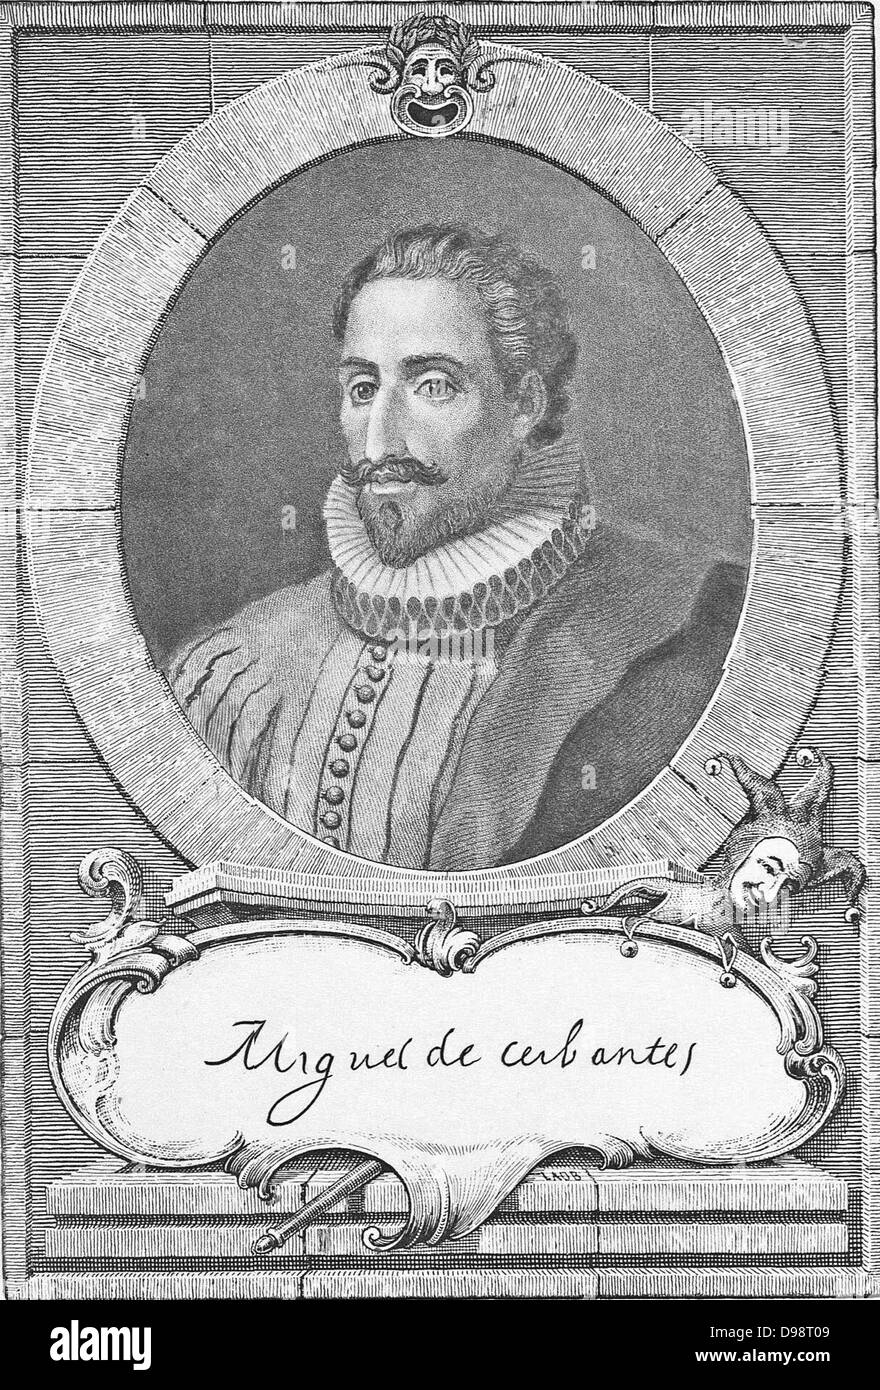 Miguel de Cervantes Saavedra 1547 –  1616)  Spanish novelist, poet, and playwright. His magnum opus Don Quixote  is considered the first modern novel Stock Photo